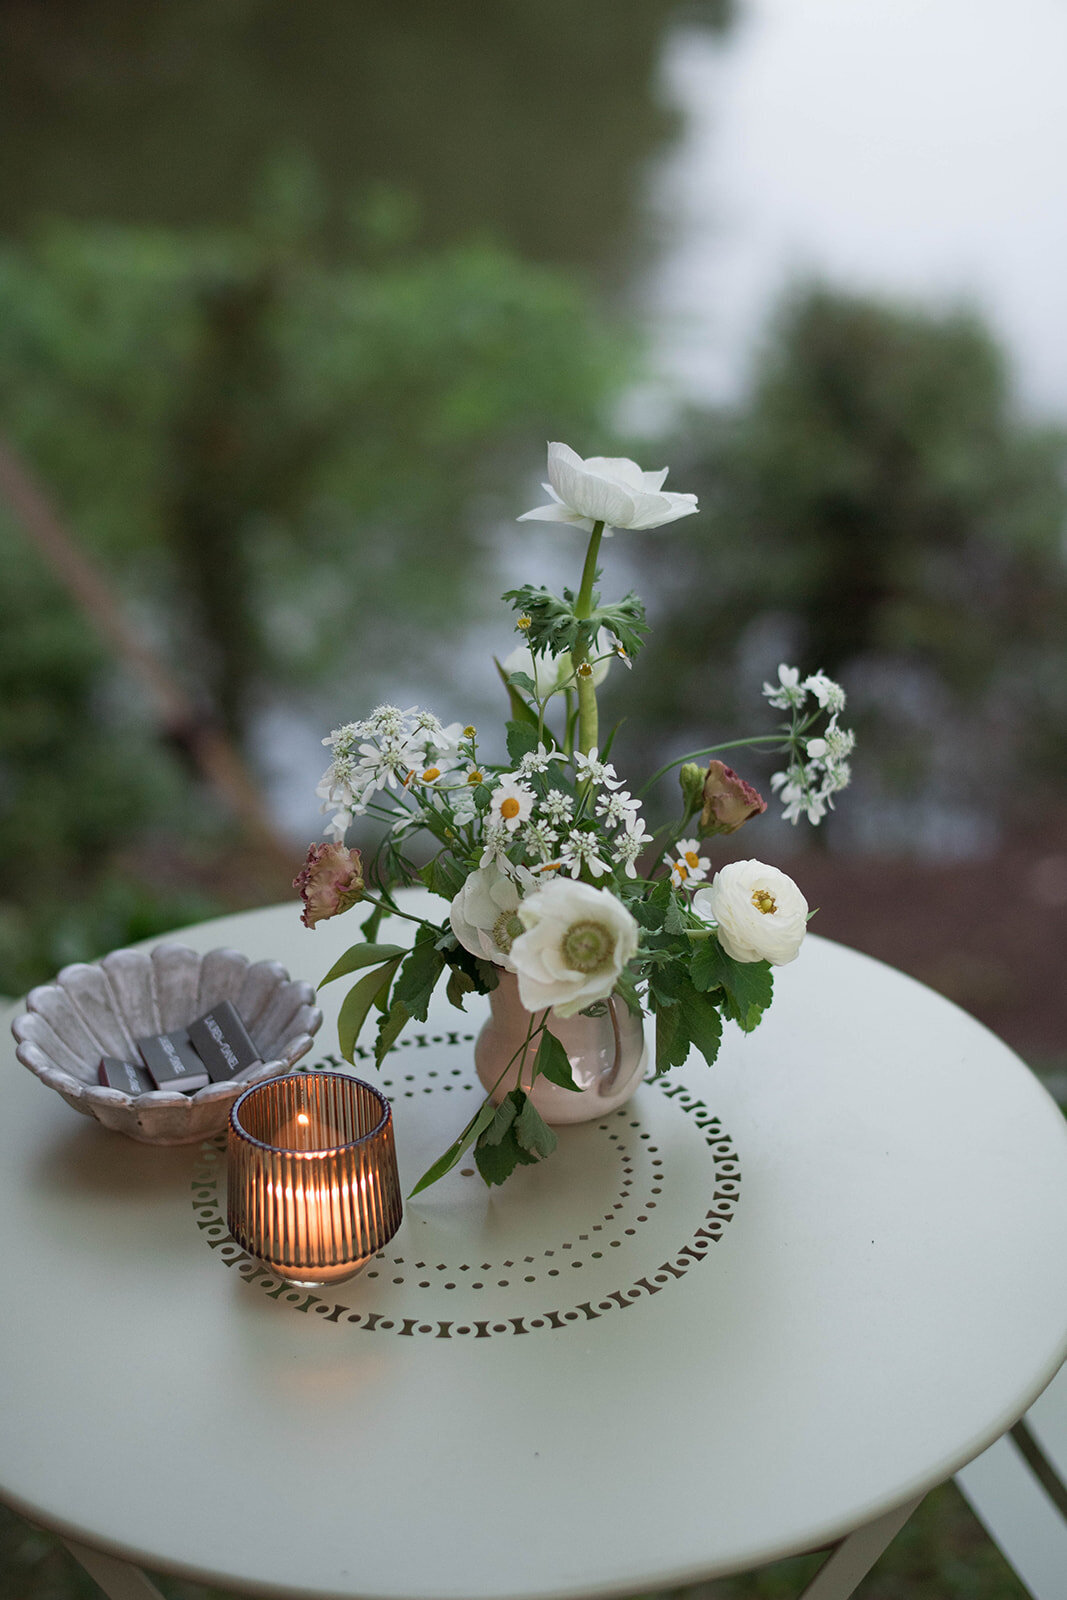 Earthy cocktail table flower arrangement with white anemone, white ranunculus, and daisies. Amber votives and matchbooks on the cocktail table.